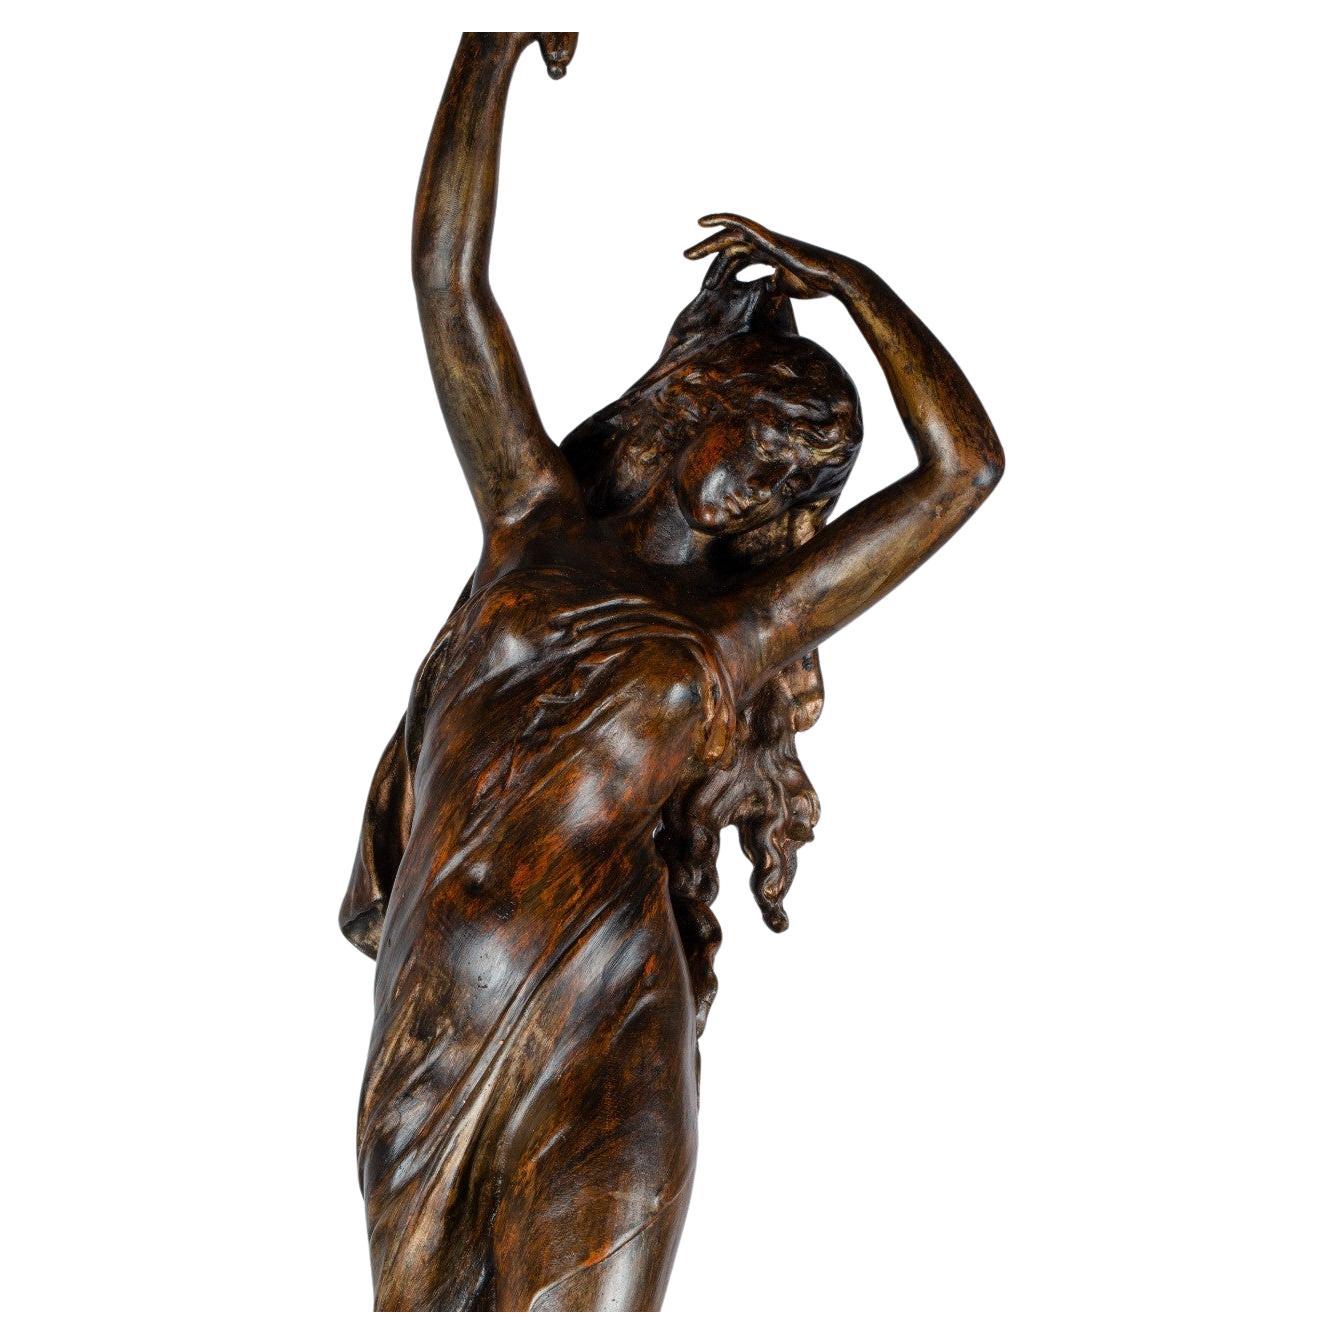 Classic Woman Sculpture Lamp by Val D' Osne
Bronze sculpture lamp from the late 19th century, which represents a woman in Greco-Roman period costumes, carrying light in her hand with a lampshade that gives the sensation, due to its shape, that she